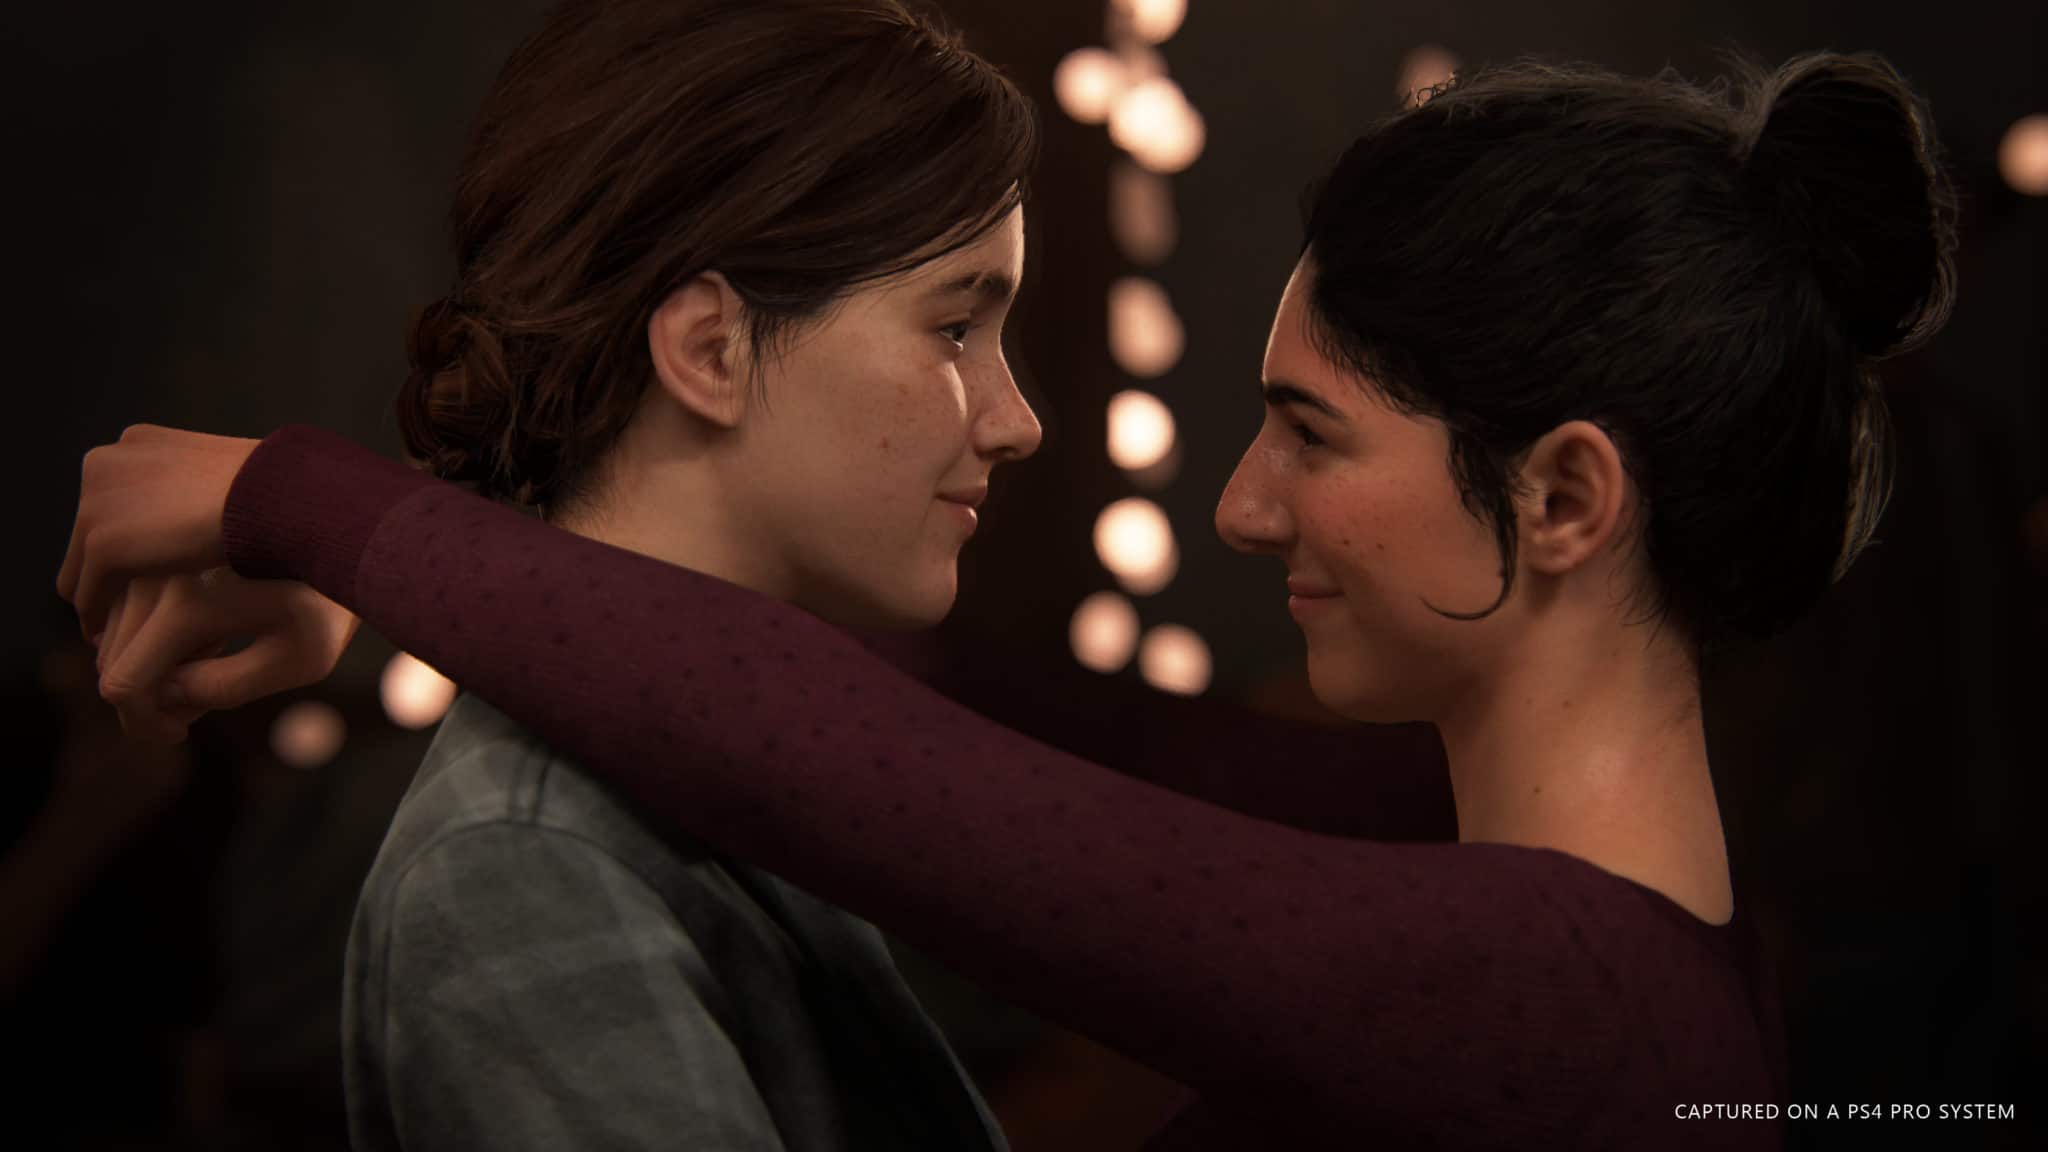 BAFTA Games Awards 2021: The Last Of Us Part II leads nominations